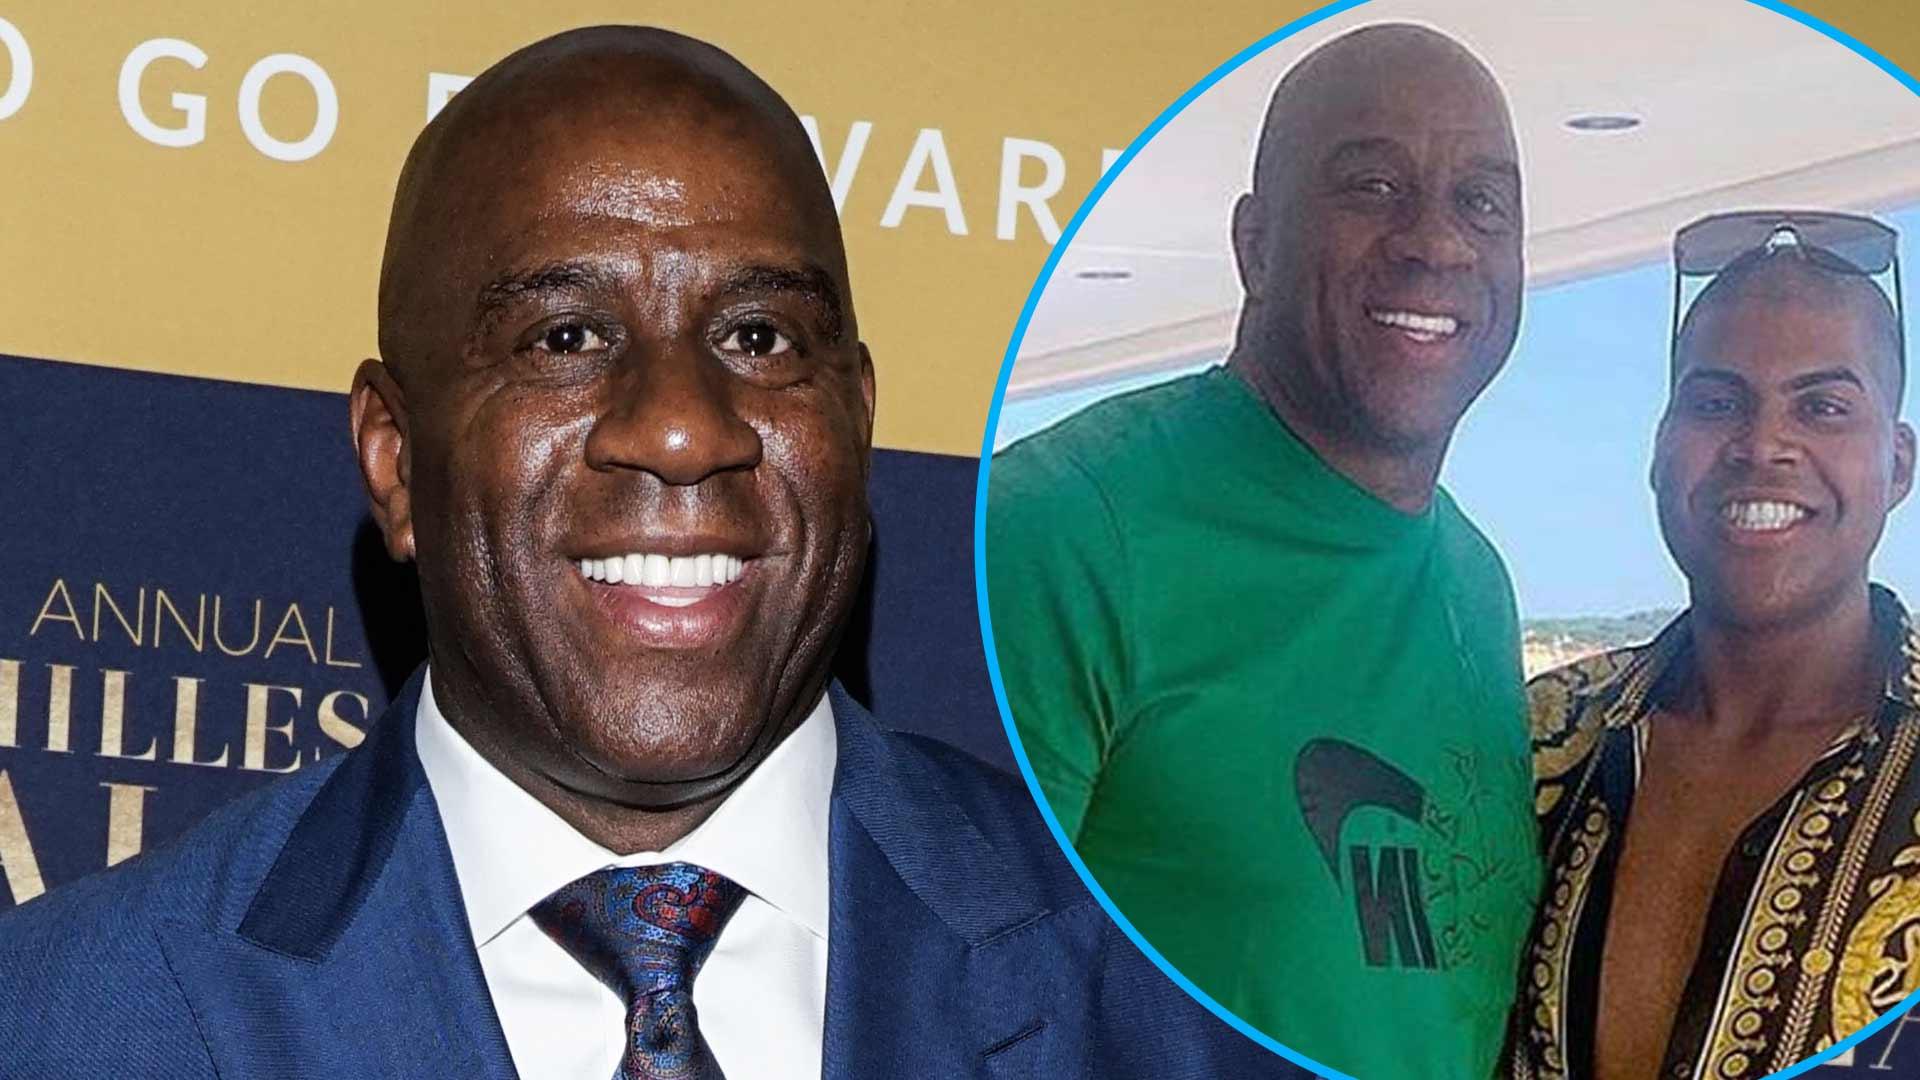 Magic Johnson Shares Sweet Post For Son EJ’s 28th Birthday: ‘Let Your Light Shine!’